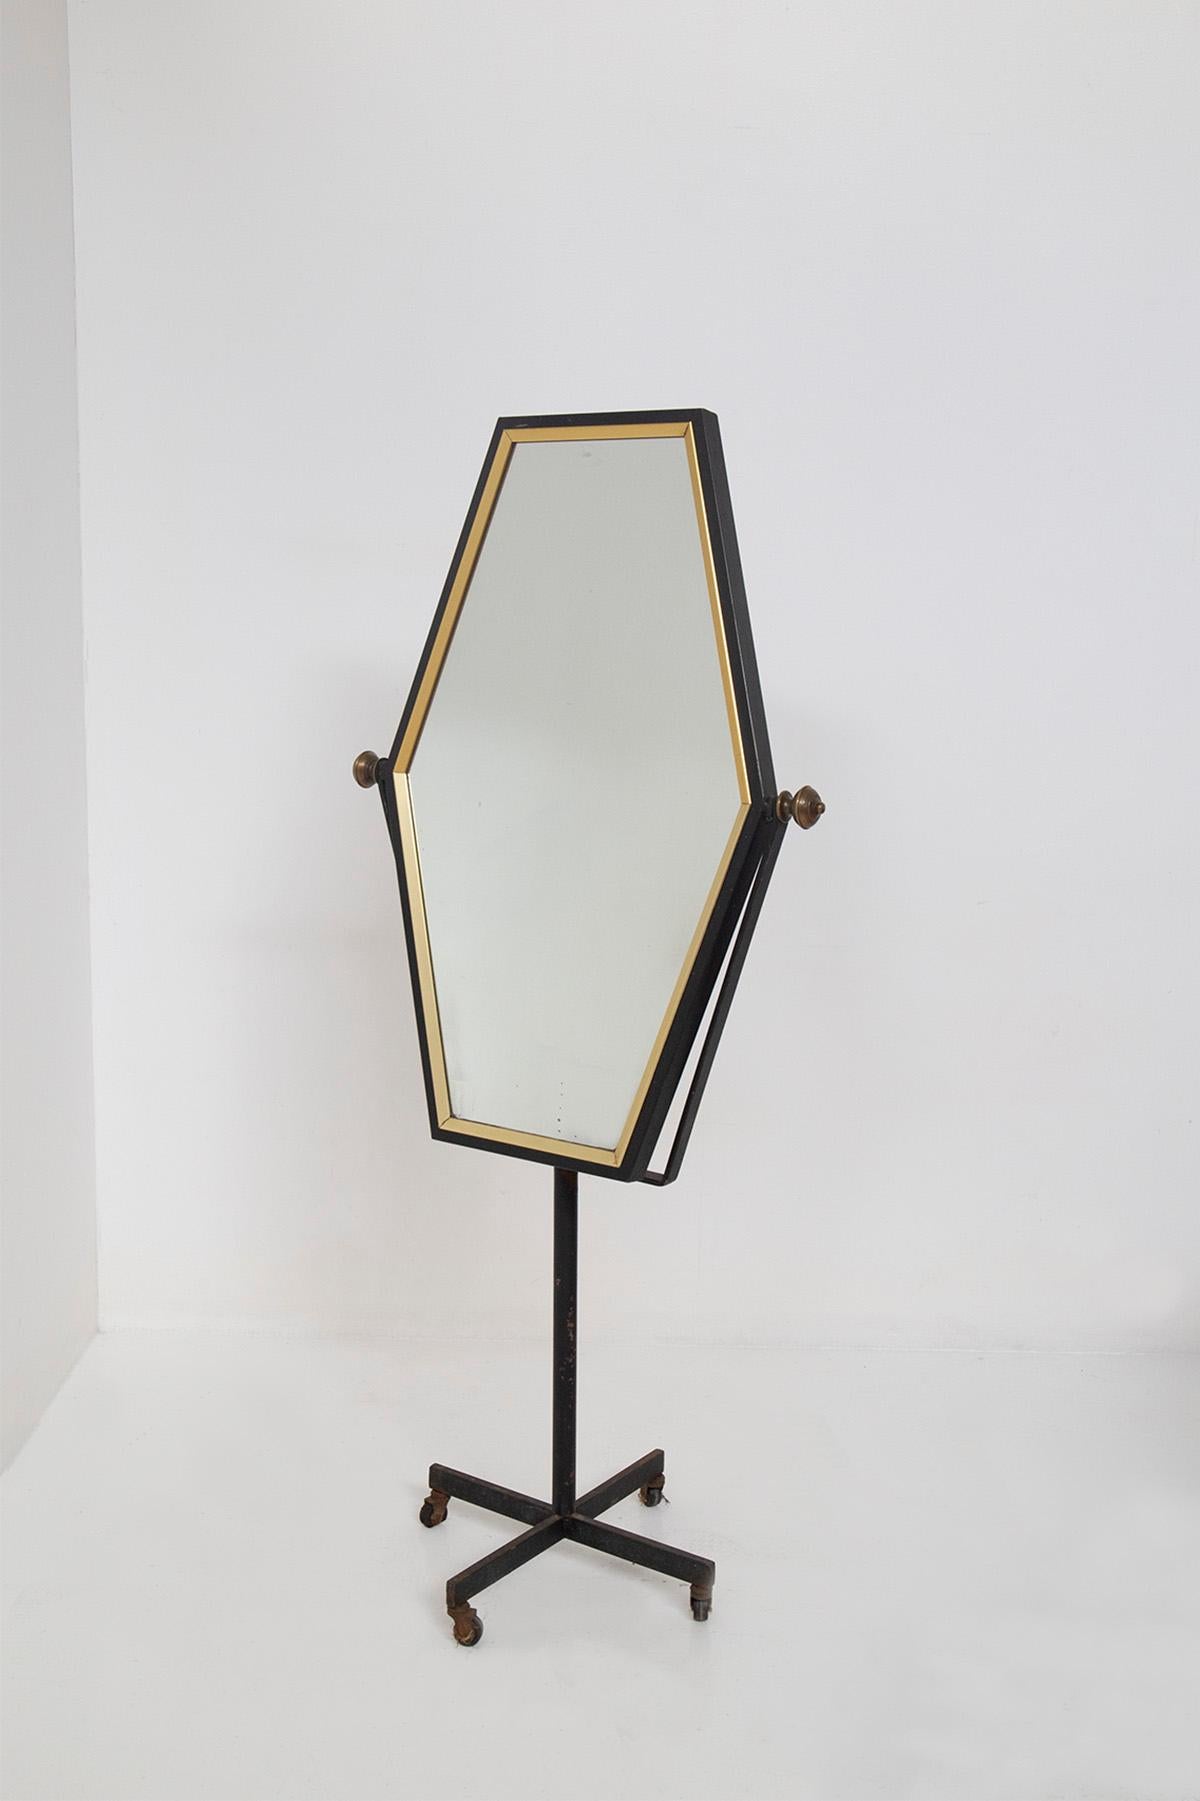 Step into a world of timeless elegance with our extraordinary Italian floor mirror from the 1950s. This exquisite piece exudes sophistication and charm, adding a touch of vintage luxury to any refined environment.

Crafted with the utmost care and